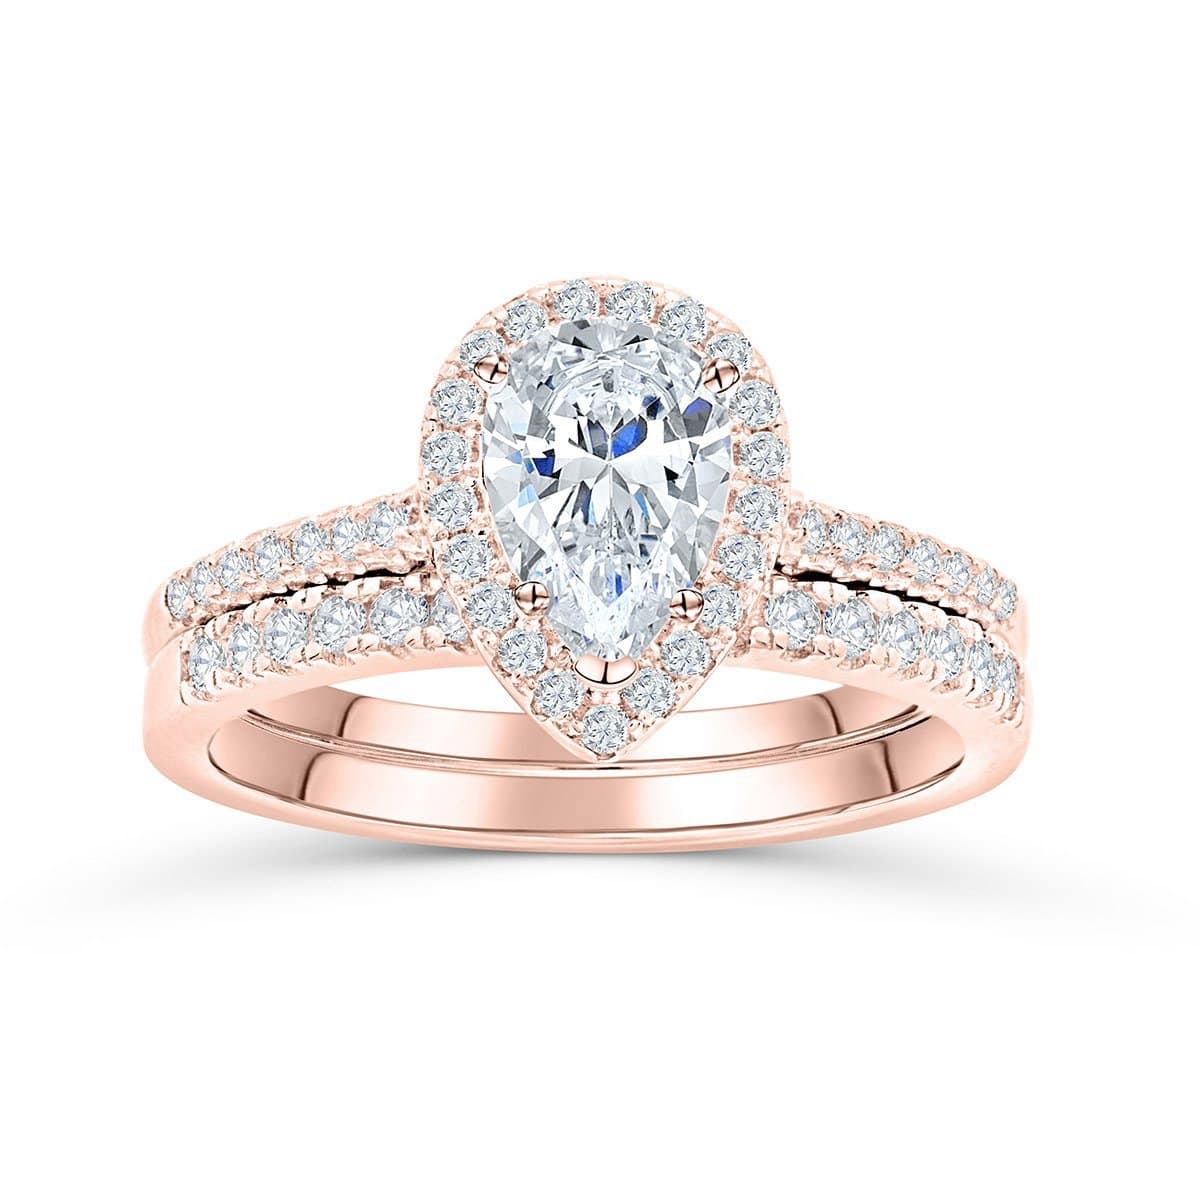 the bliss rose gold pear shaped engagement ring